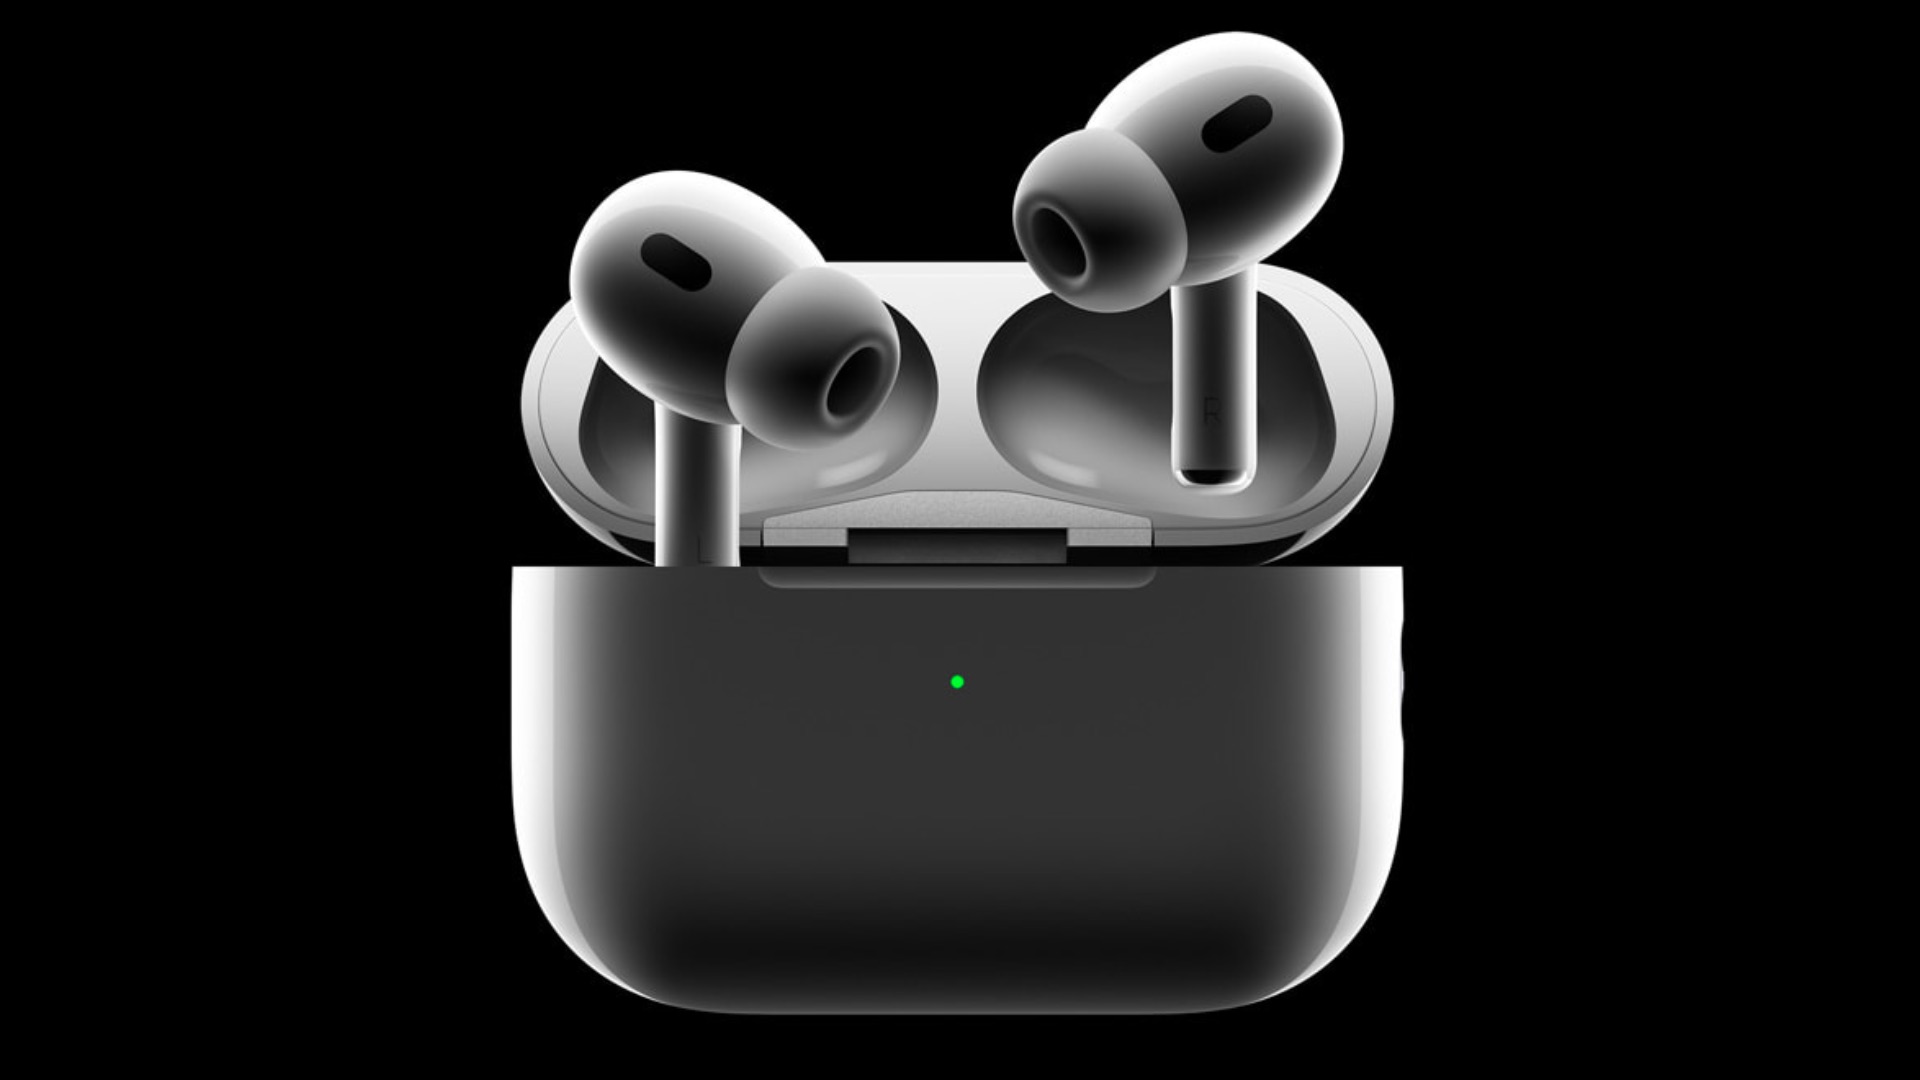 sundhed samarbejde tub AirPods Pro: Recently Launched! New H2 Chip and Better Battery Life